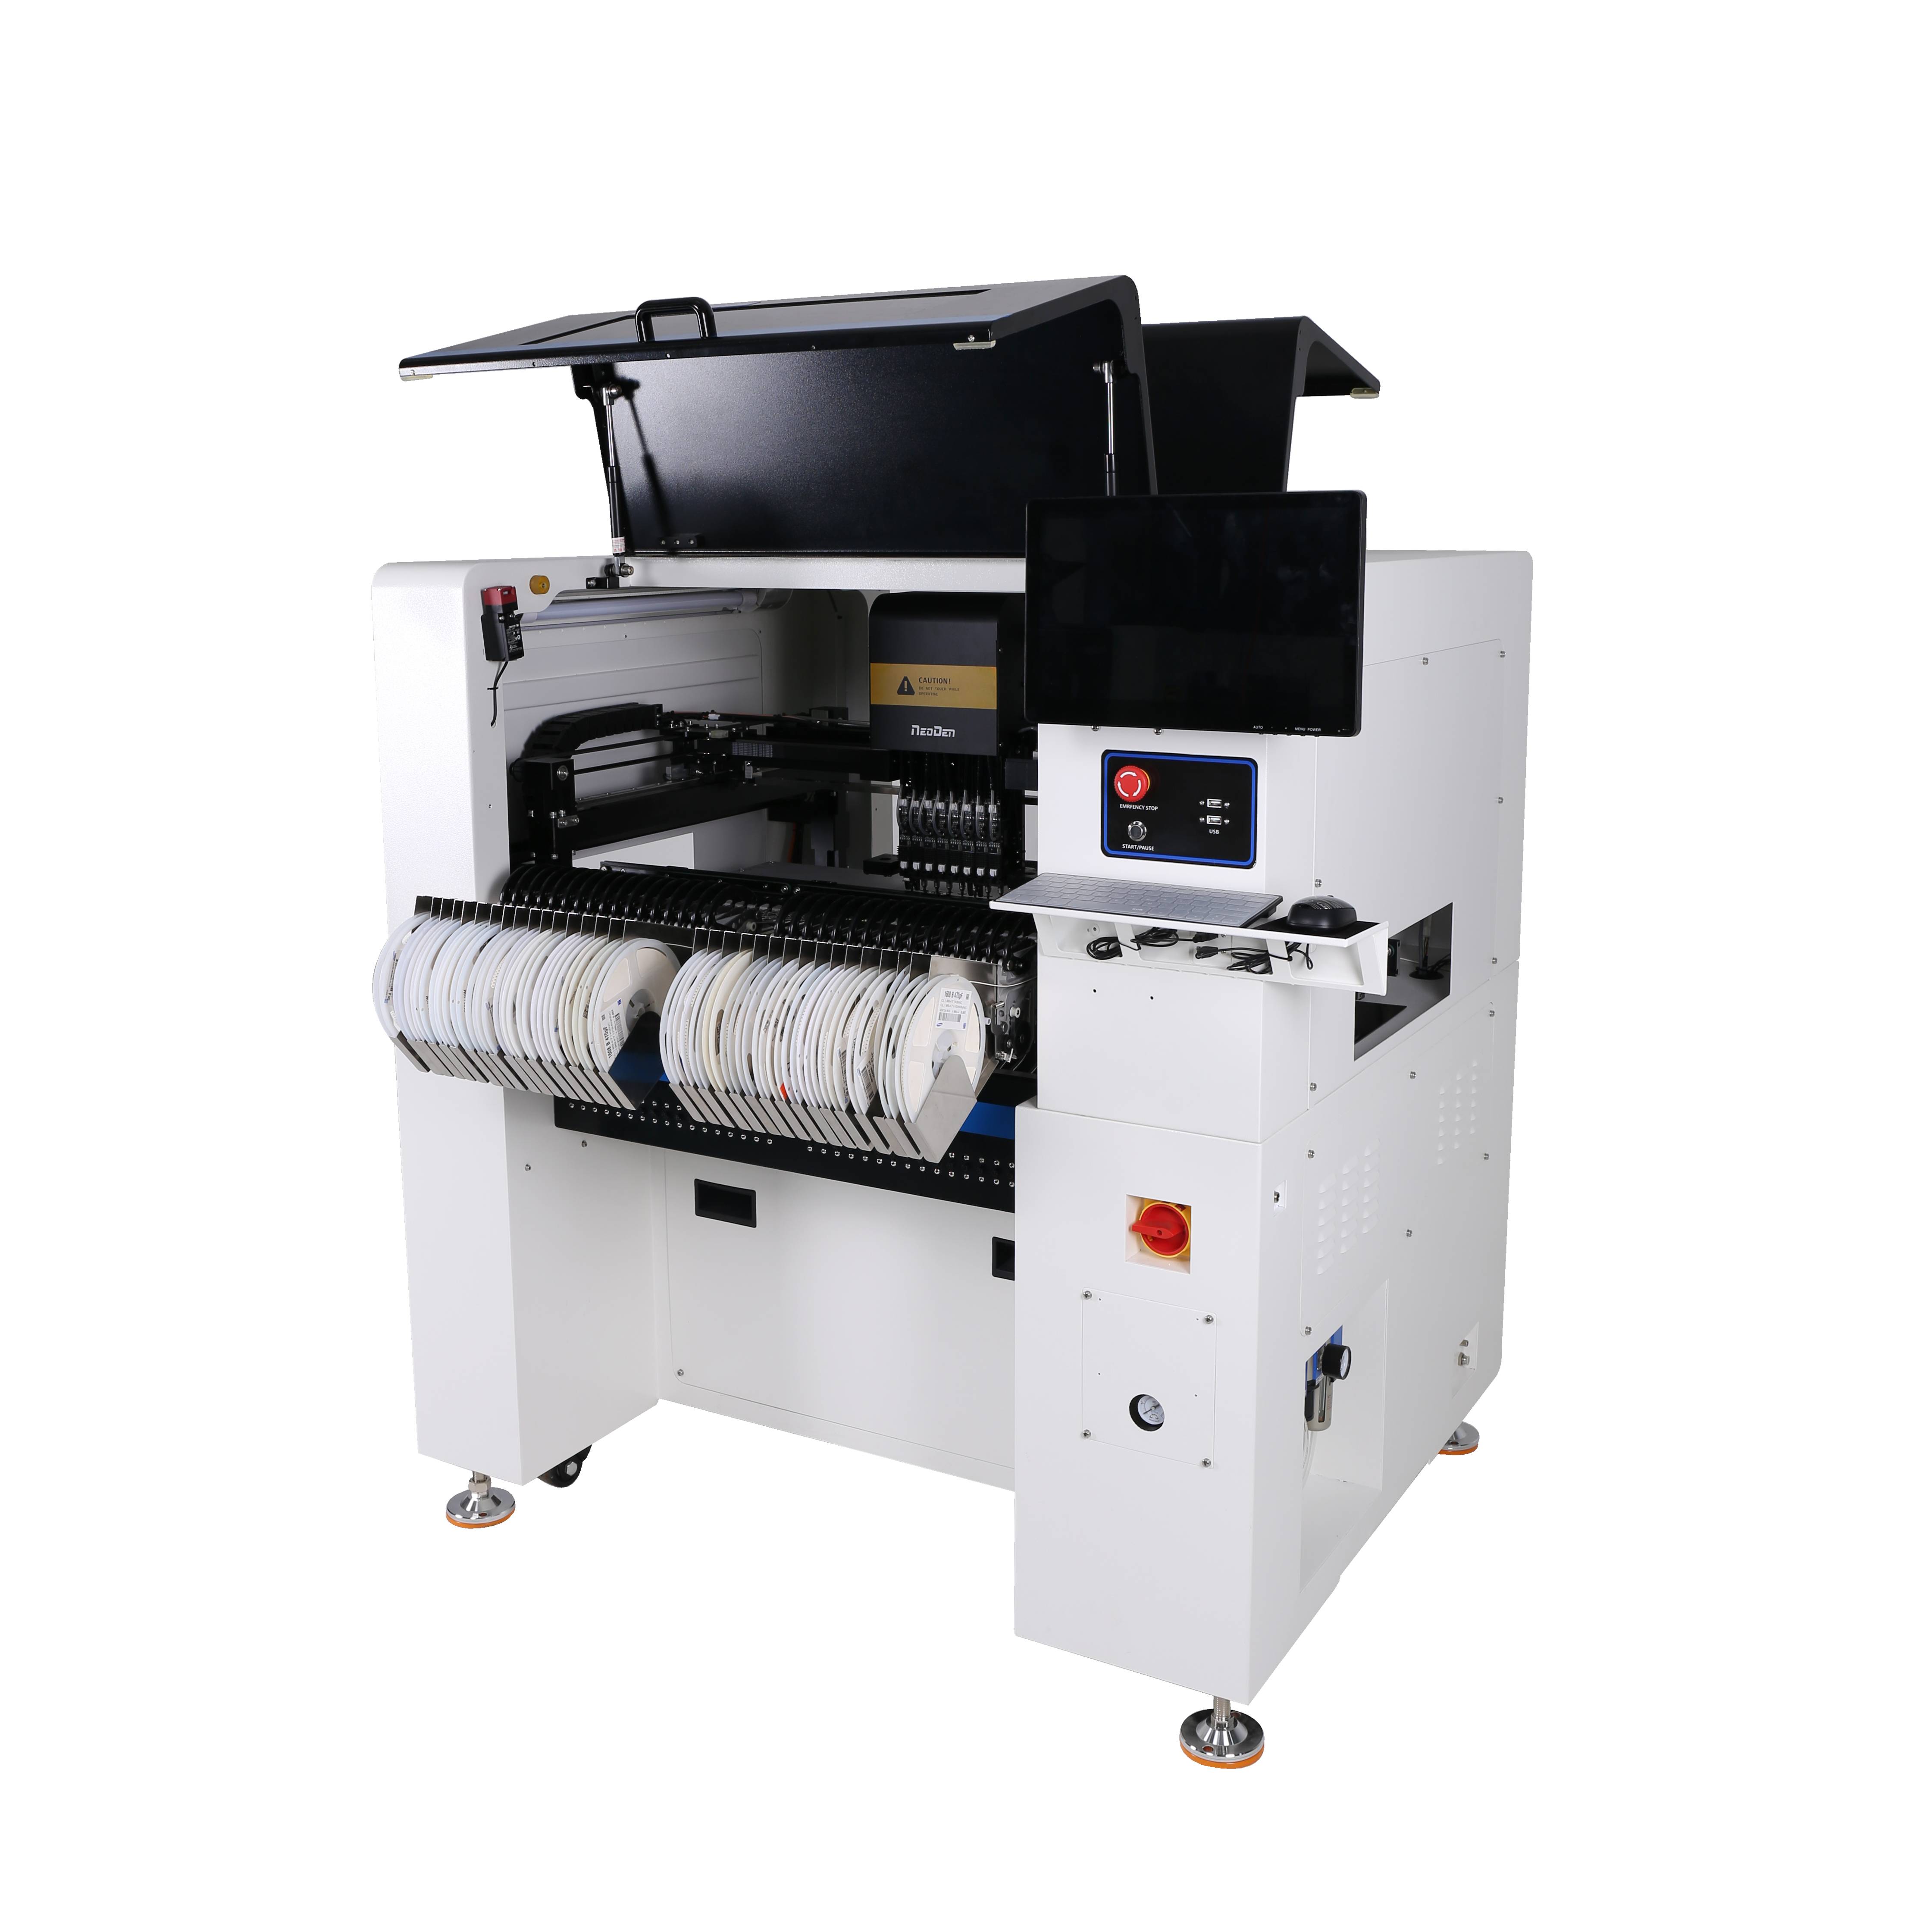 Hot-selling Smt Manufacturing Equipment - Pcb Component Placement Machine NeoDen K1830 – Neoden